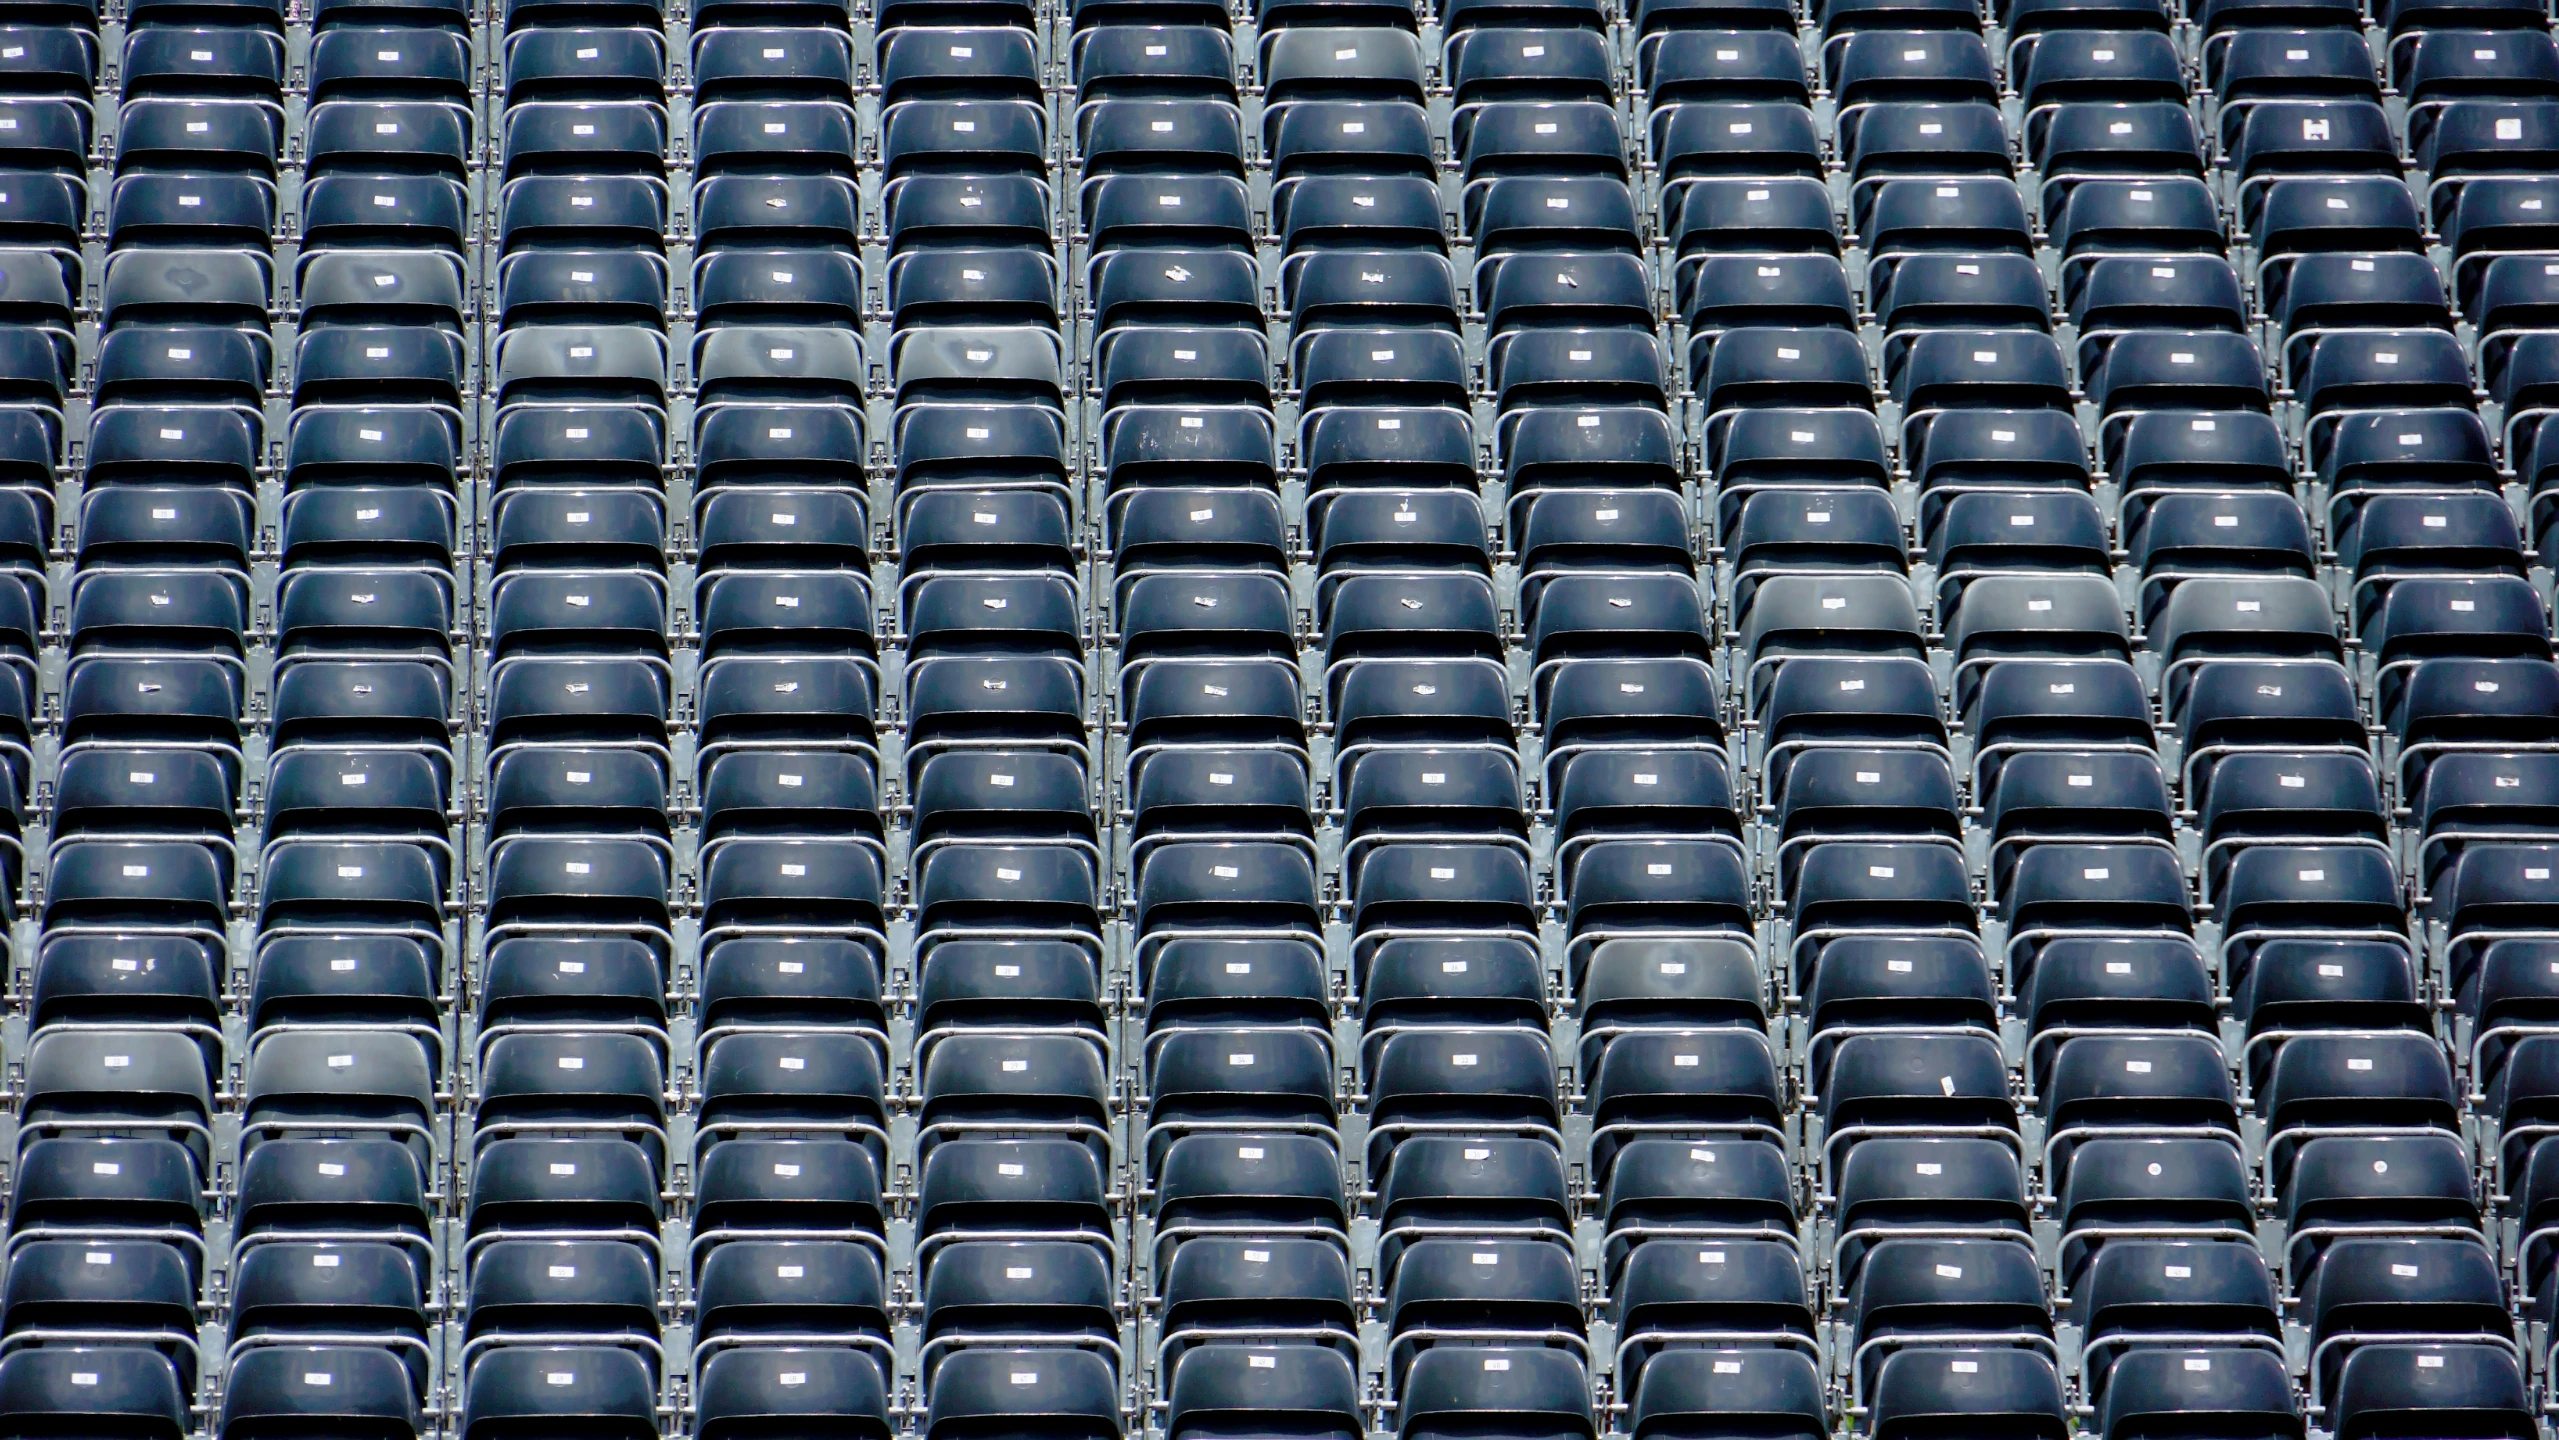 black seats sitting in the stands of an empty stadium